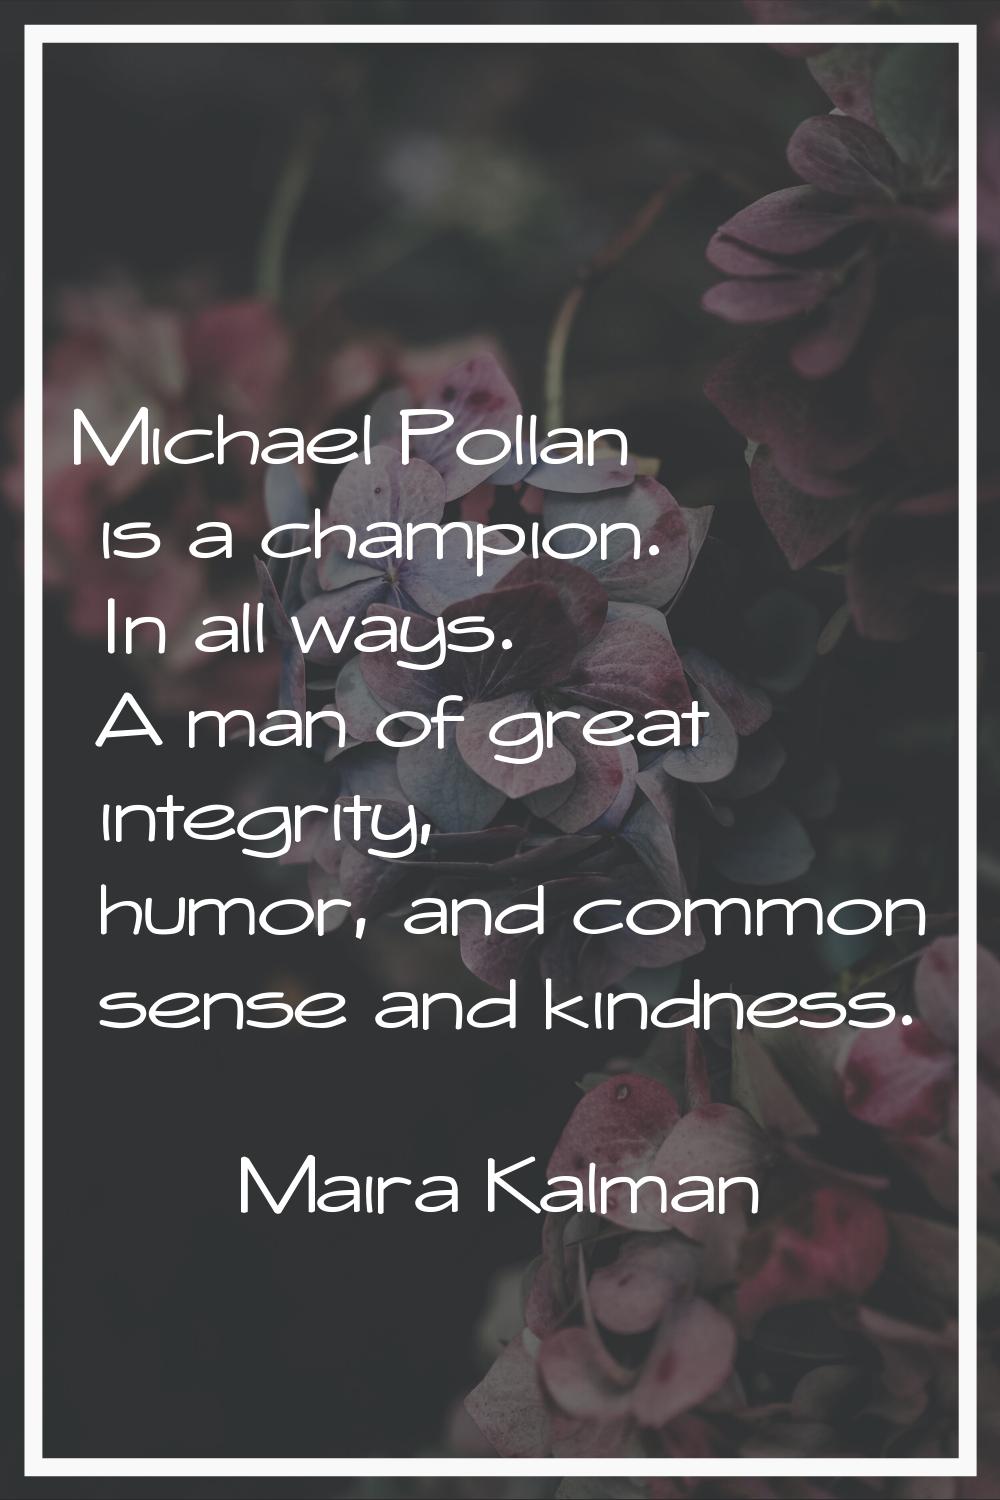 Michael Pollan is a champion. In all ways. A man of great integrity, humor, and common sense and ki